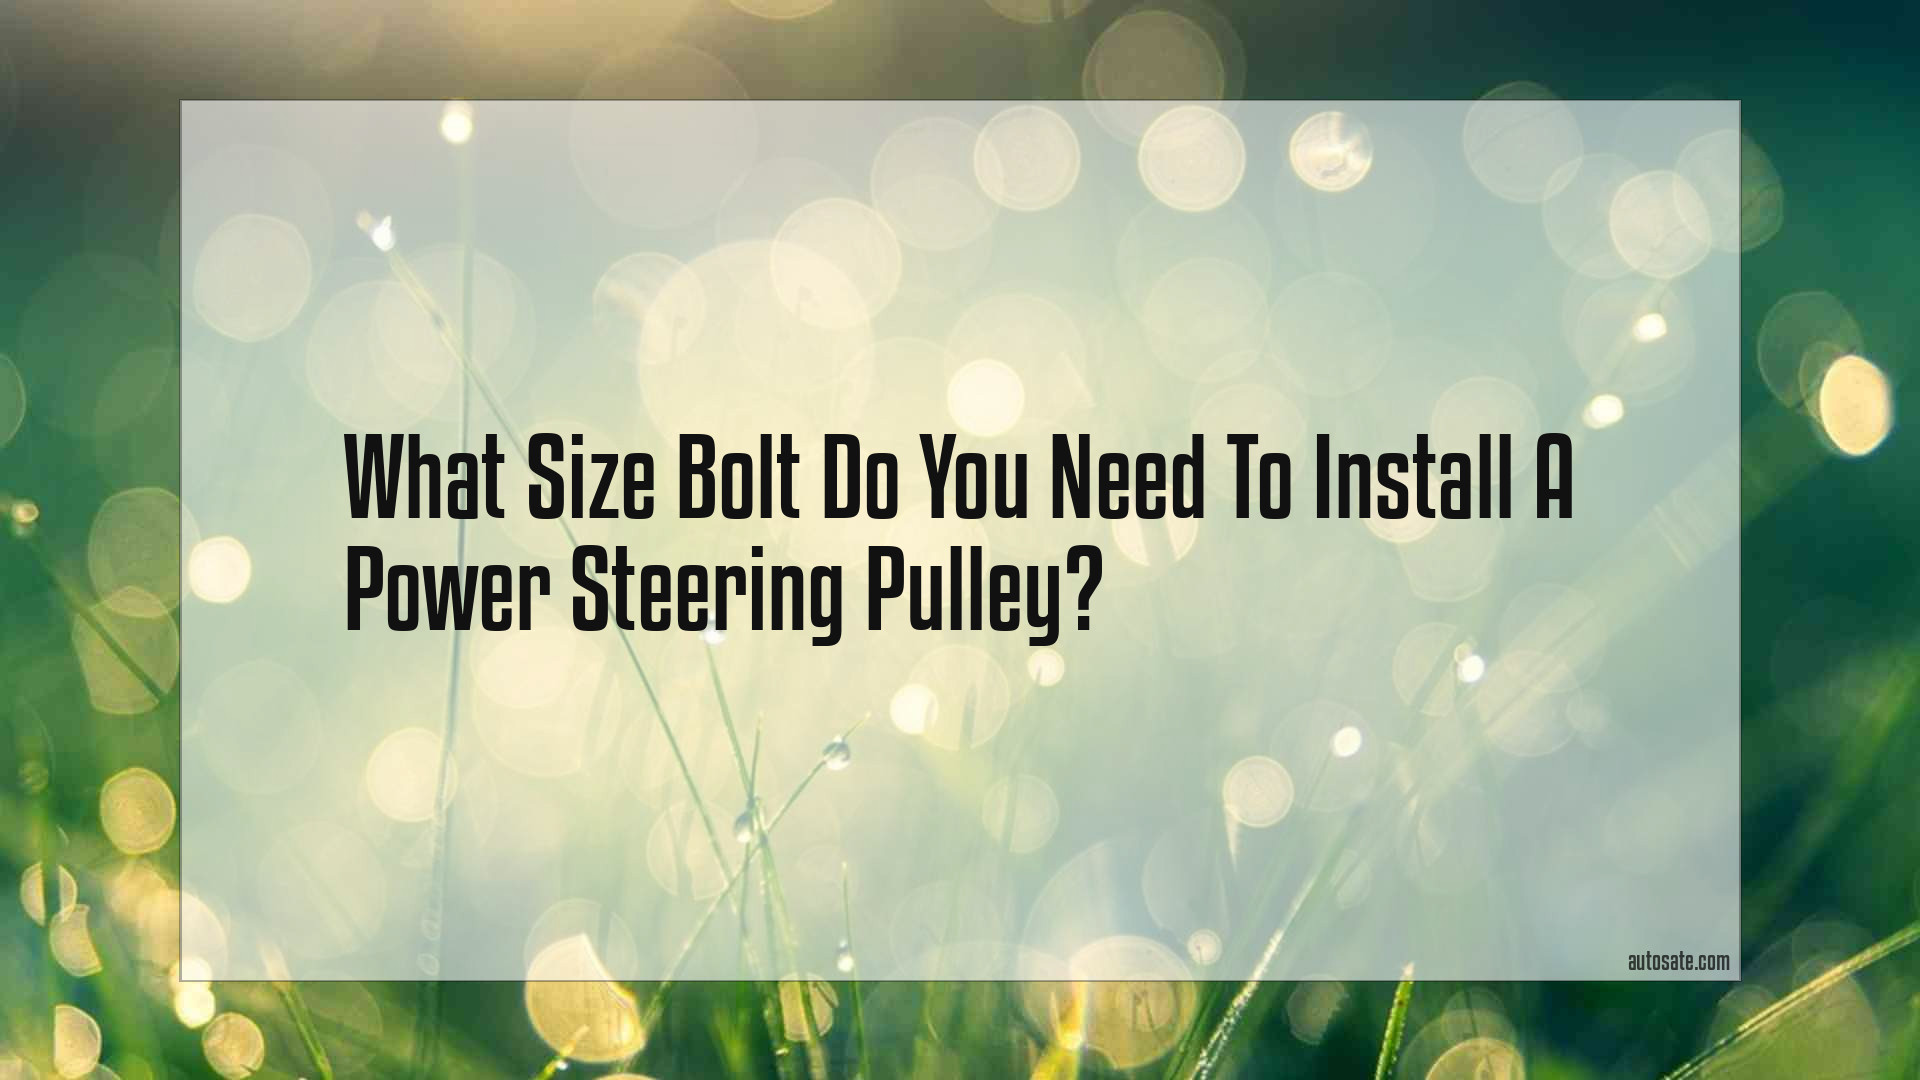 What Size Bolt Do You Need To Install A Power Steering Pulley?